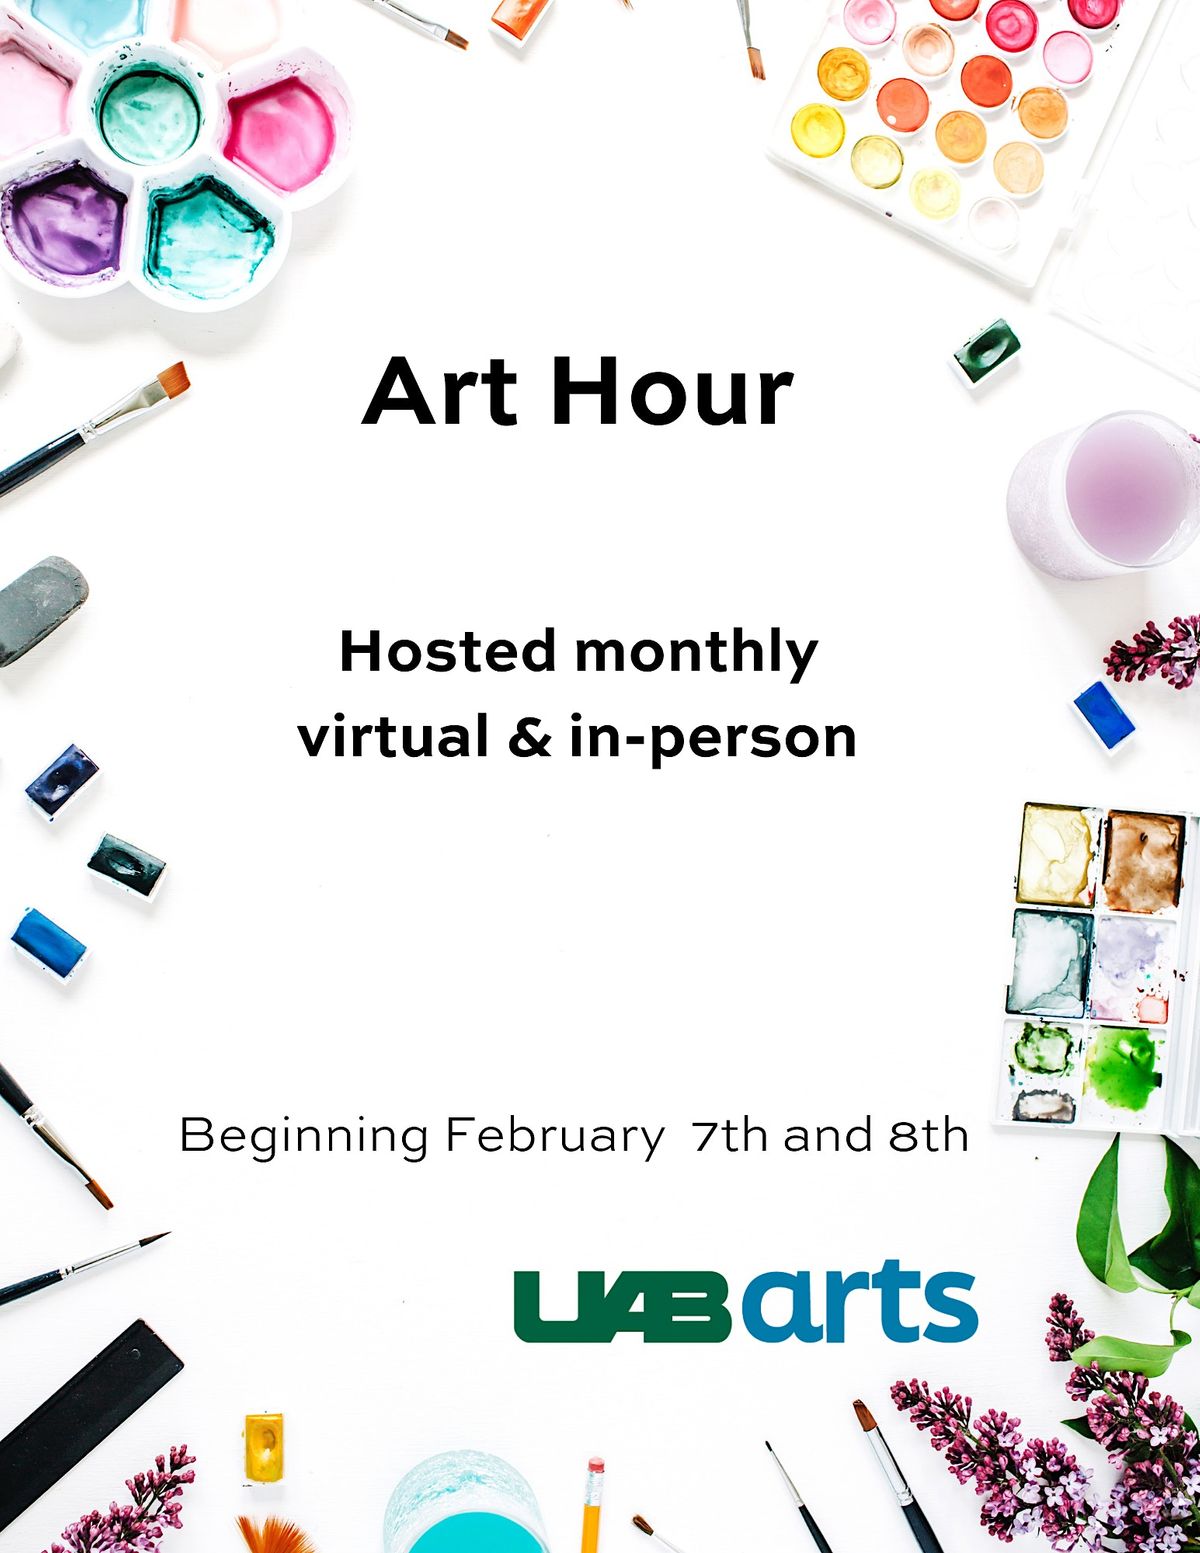 Arts in Medicine @ Forge: Art Hour